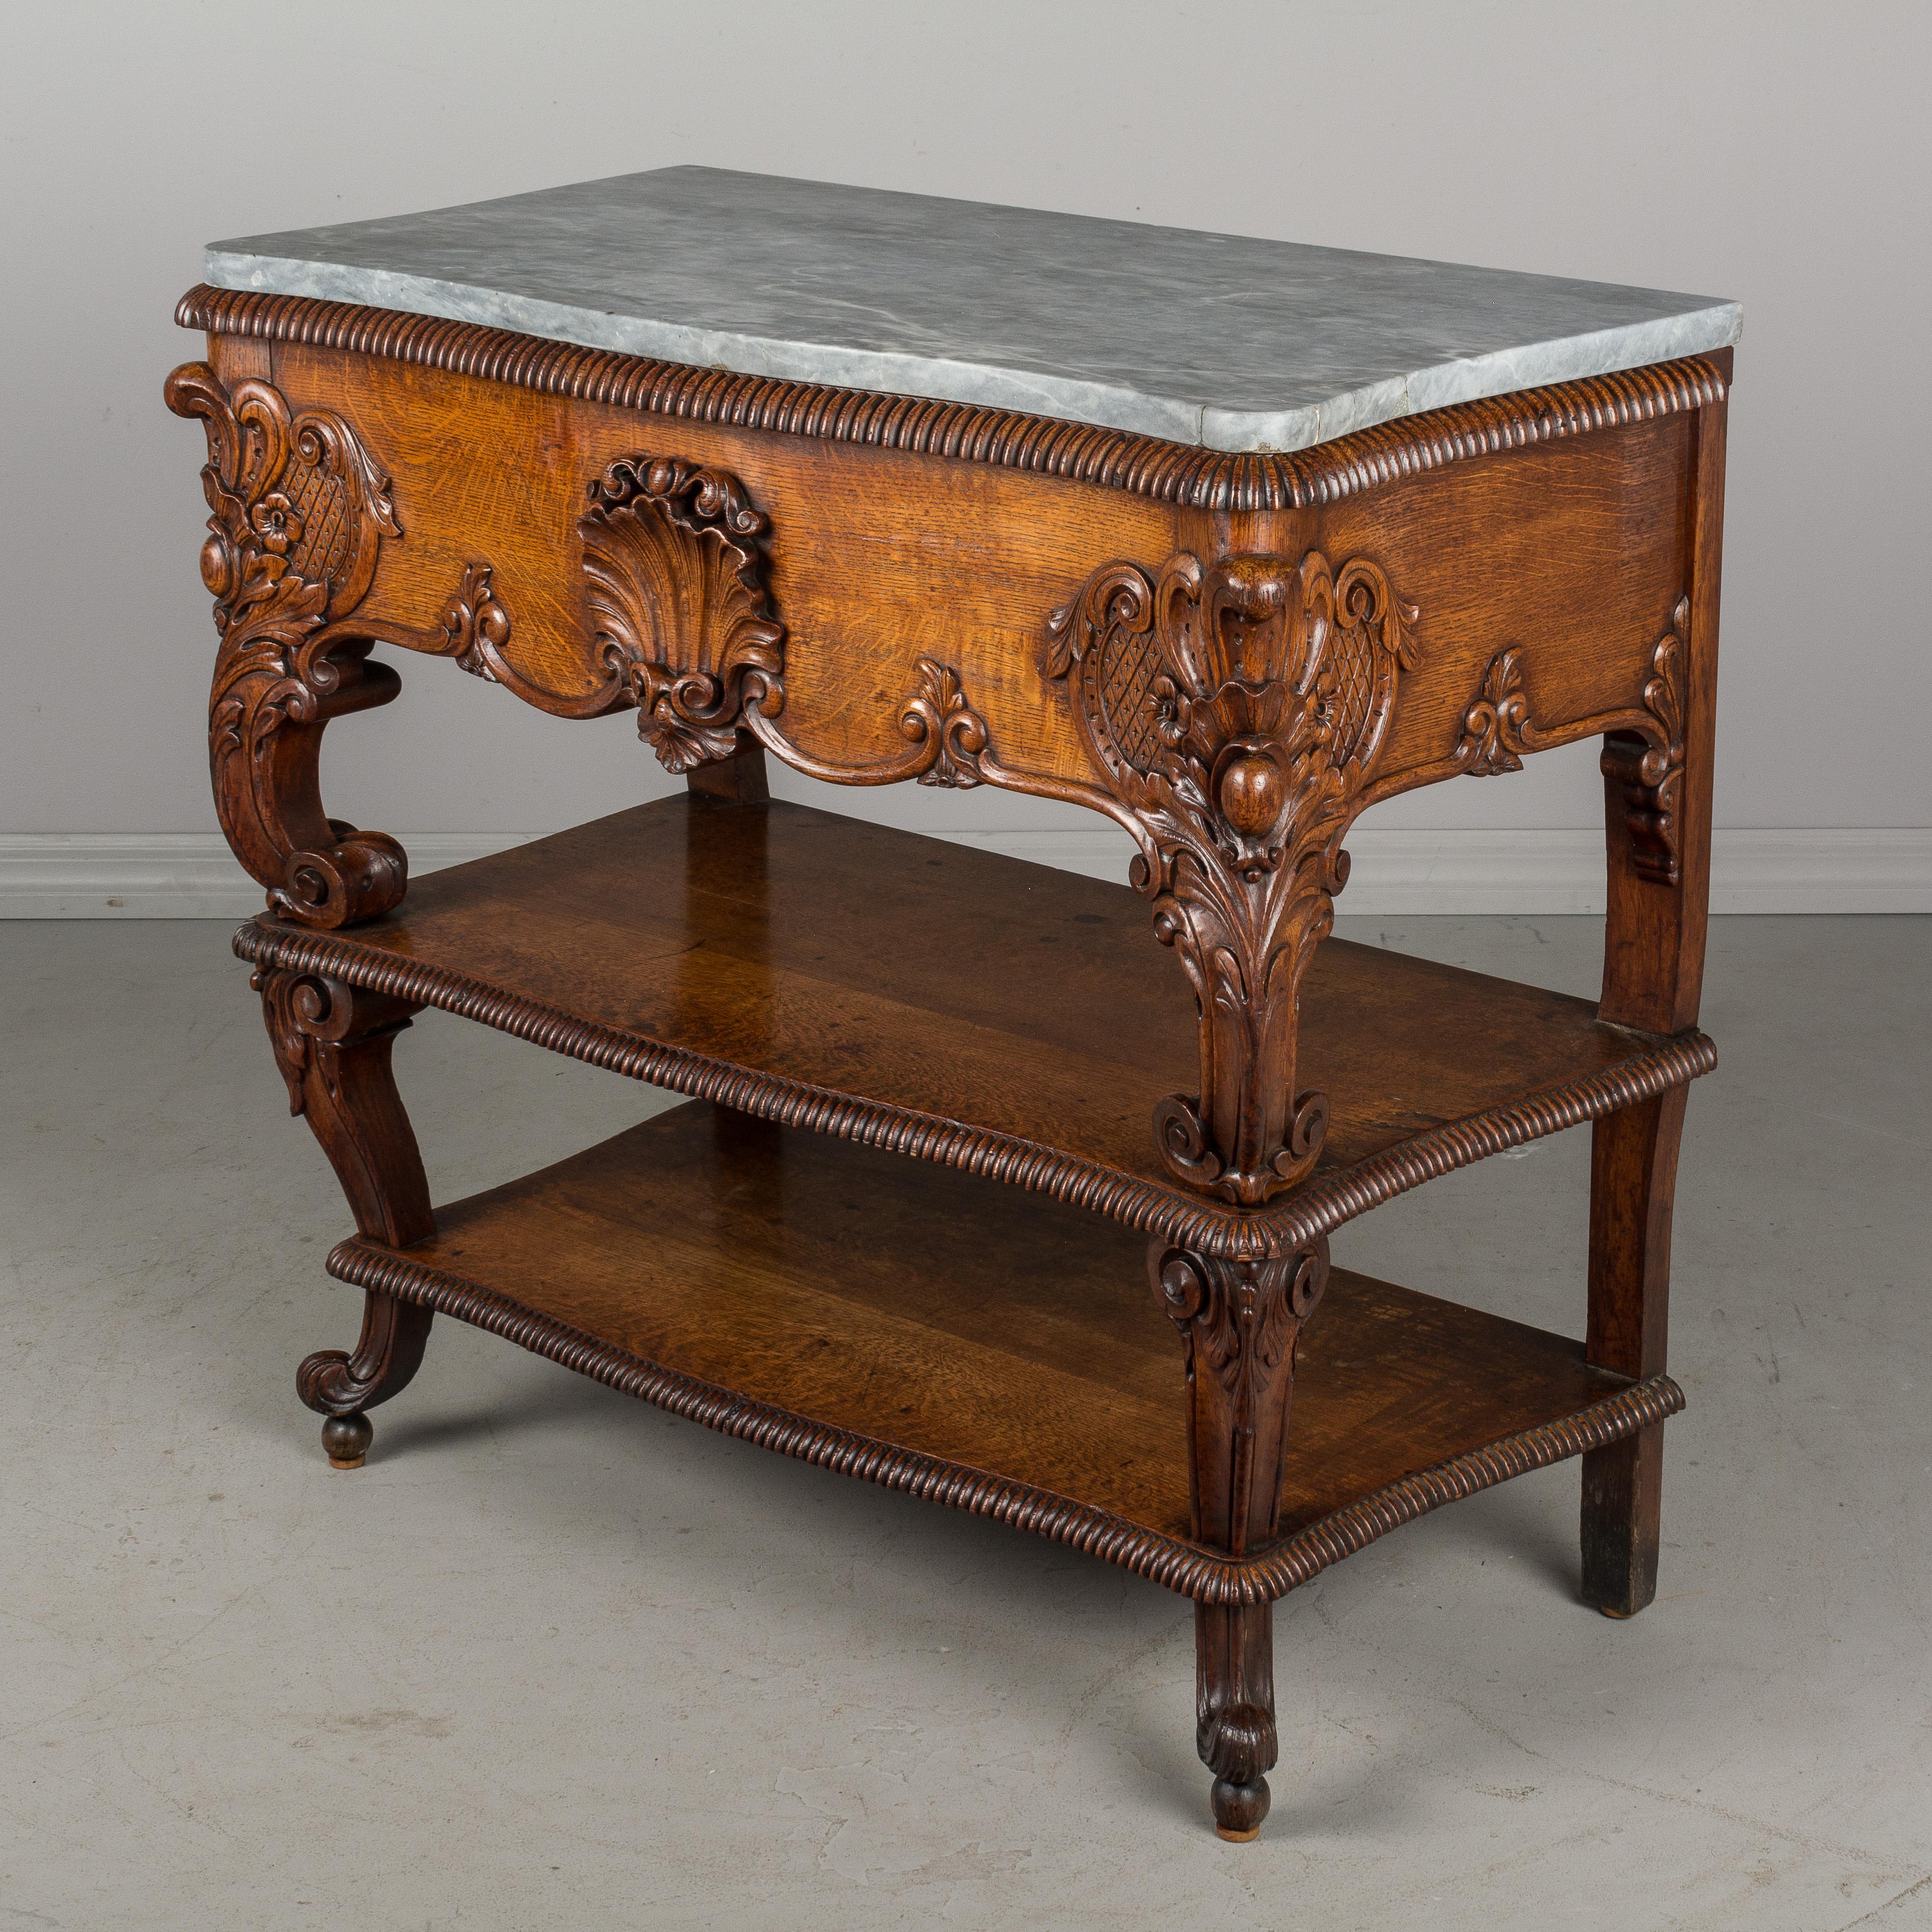 A 19th century Louis XV style console from Belgium made of solid oak with elaborate hand carved corner decoration and a large shell carving in the center. Two shelves spaced 7